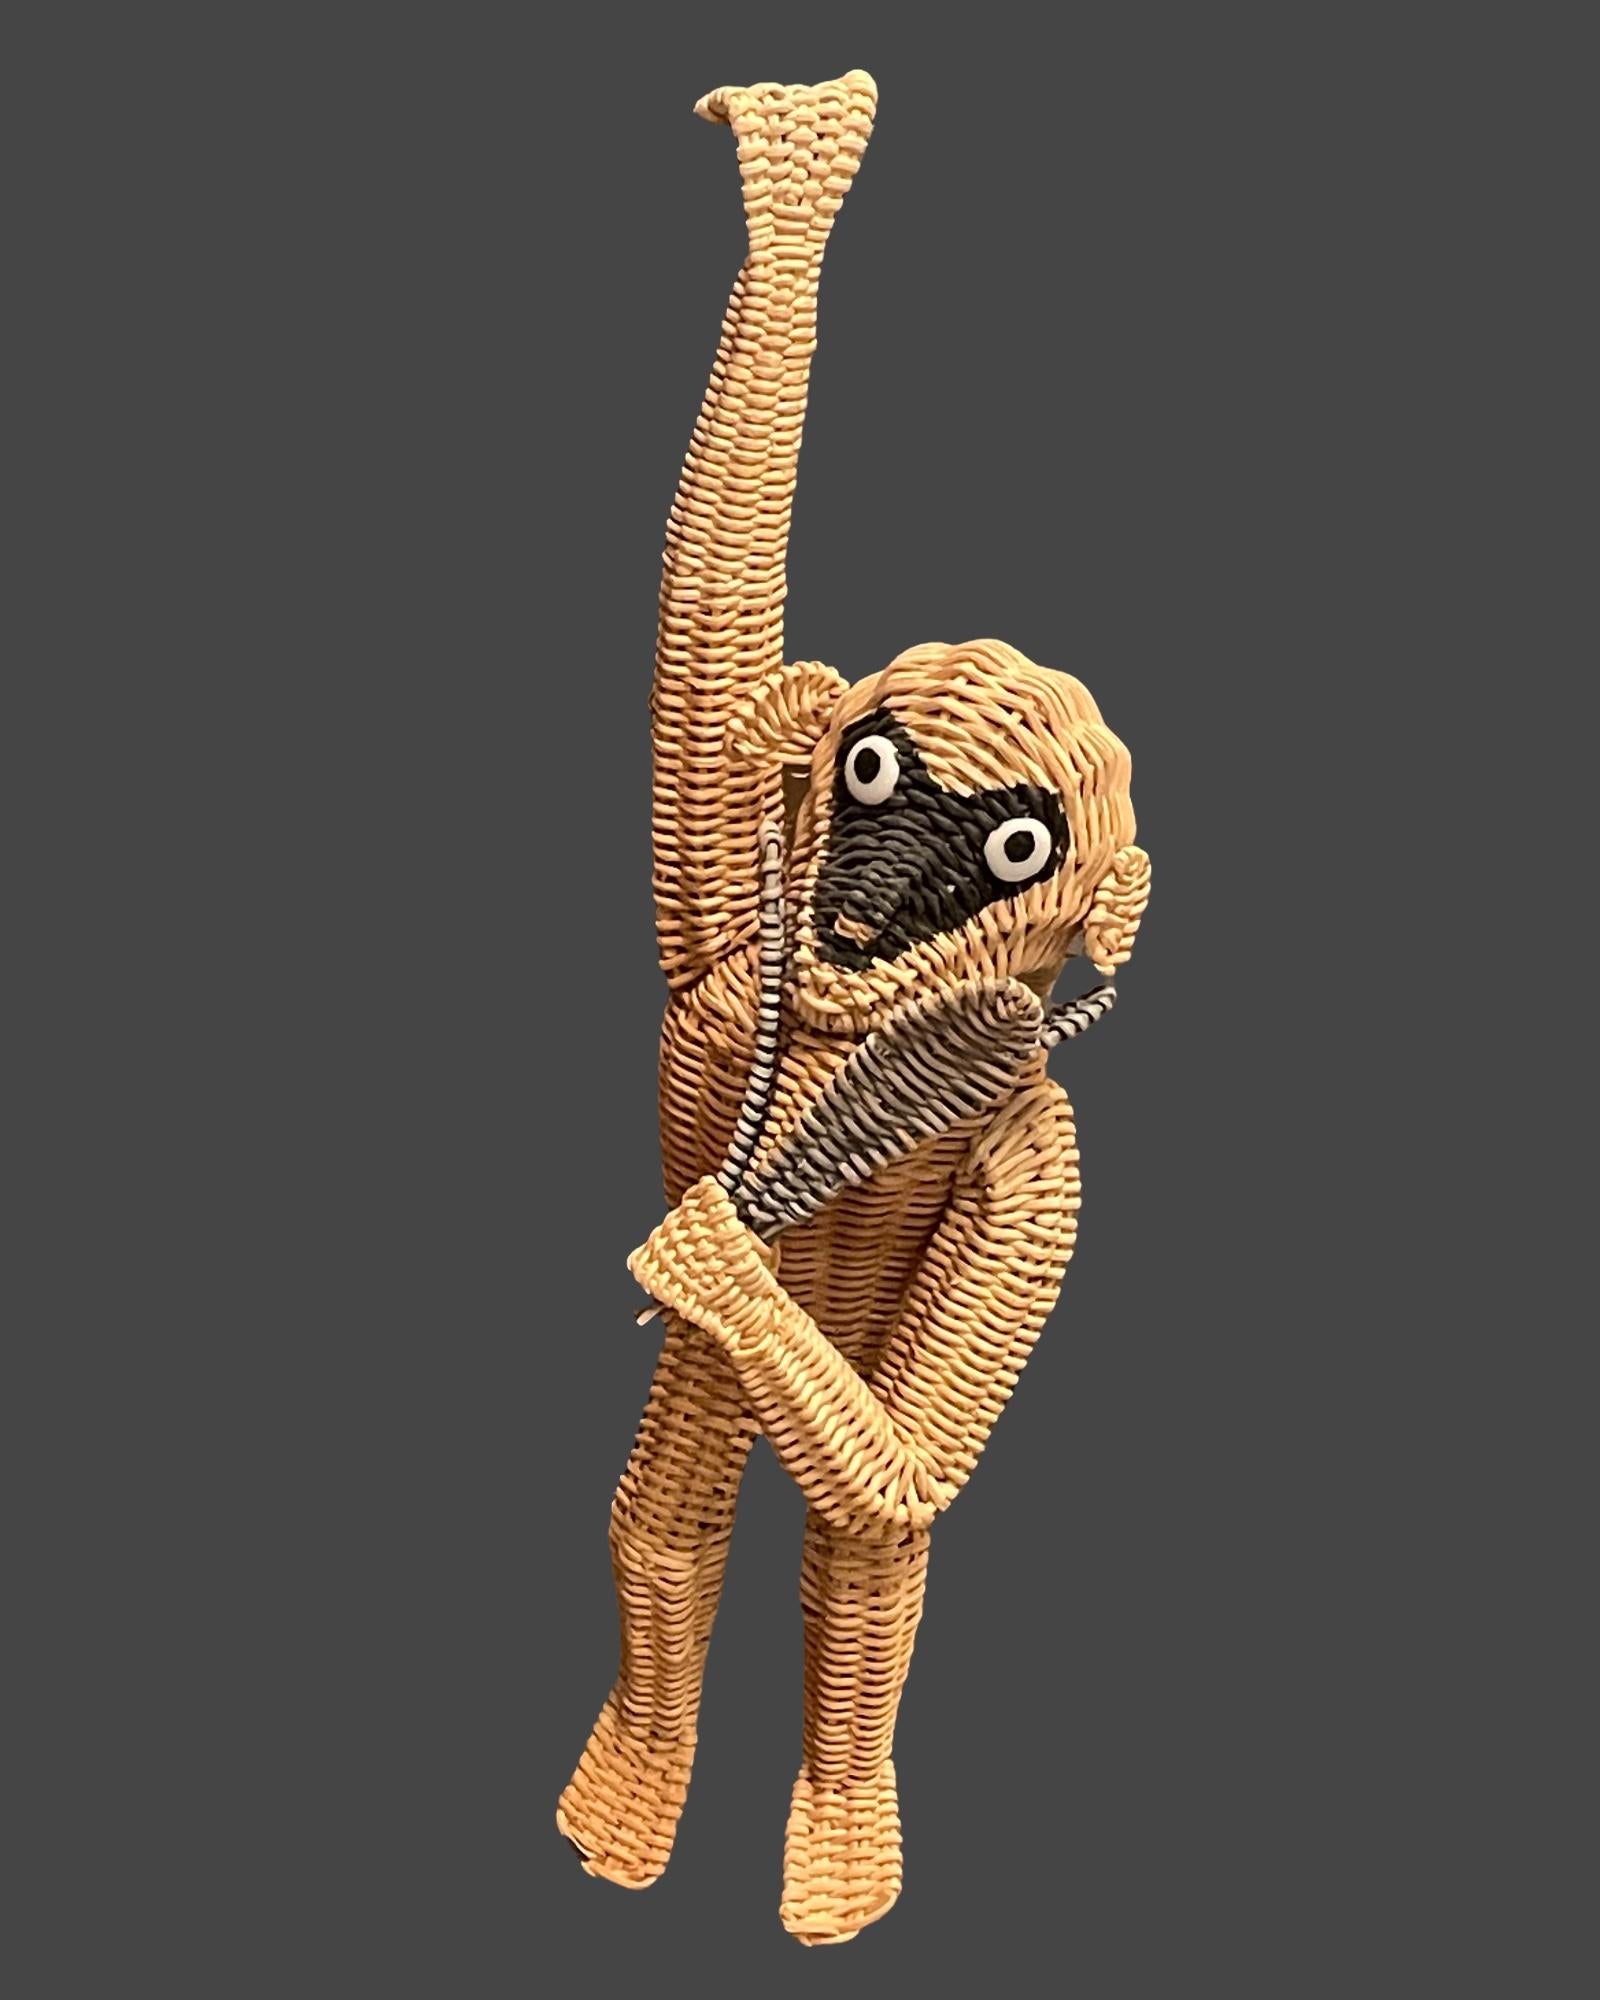 A large hanging wicker monkey holding a grouping of leaves. This cute brown monkey is created from wicker and features arms and legs which are bent so that they may hang from any spot. He has beaded eyes, a black face, and holds a bundle of green